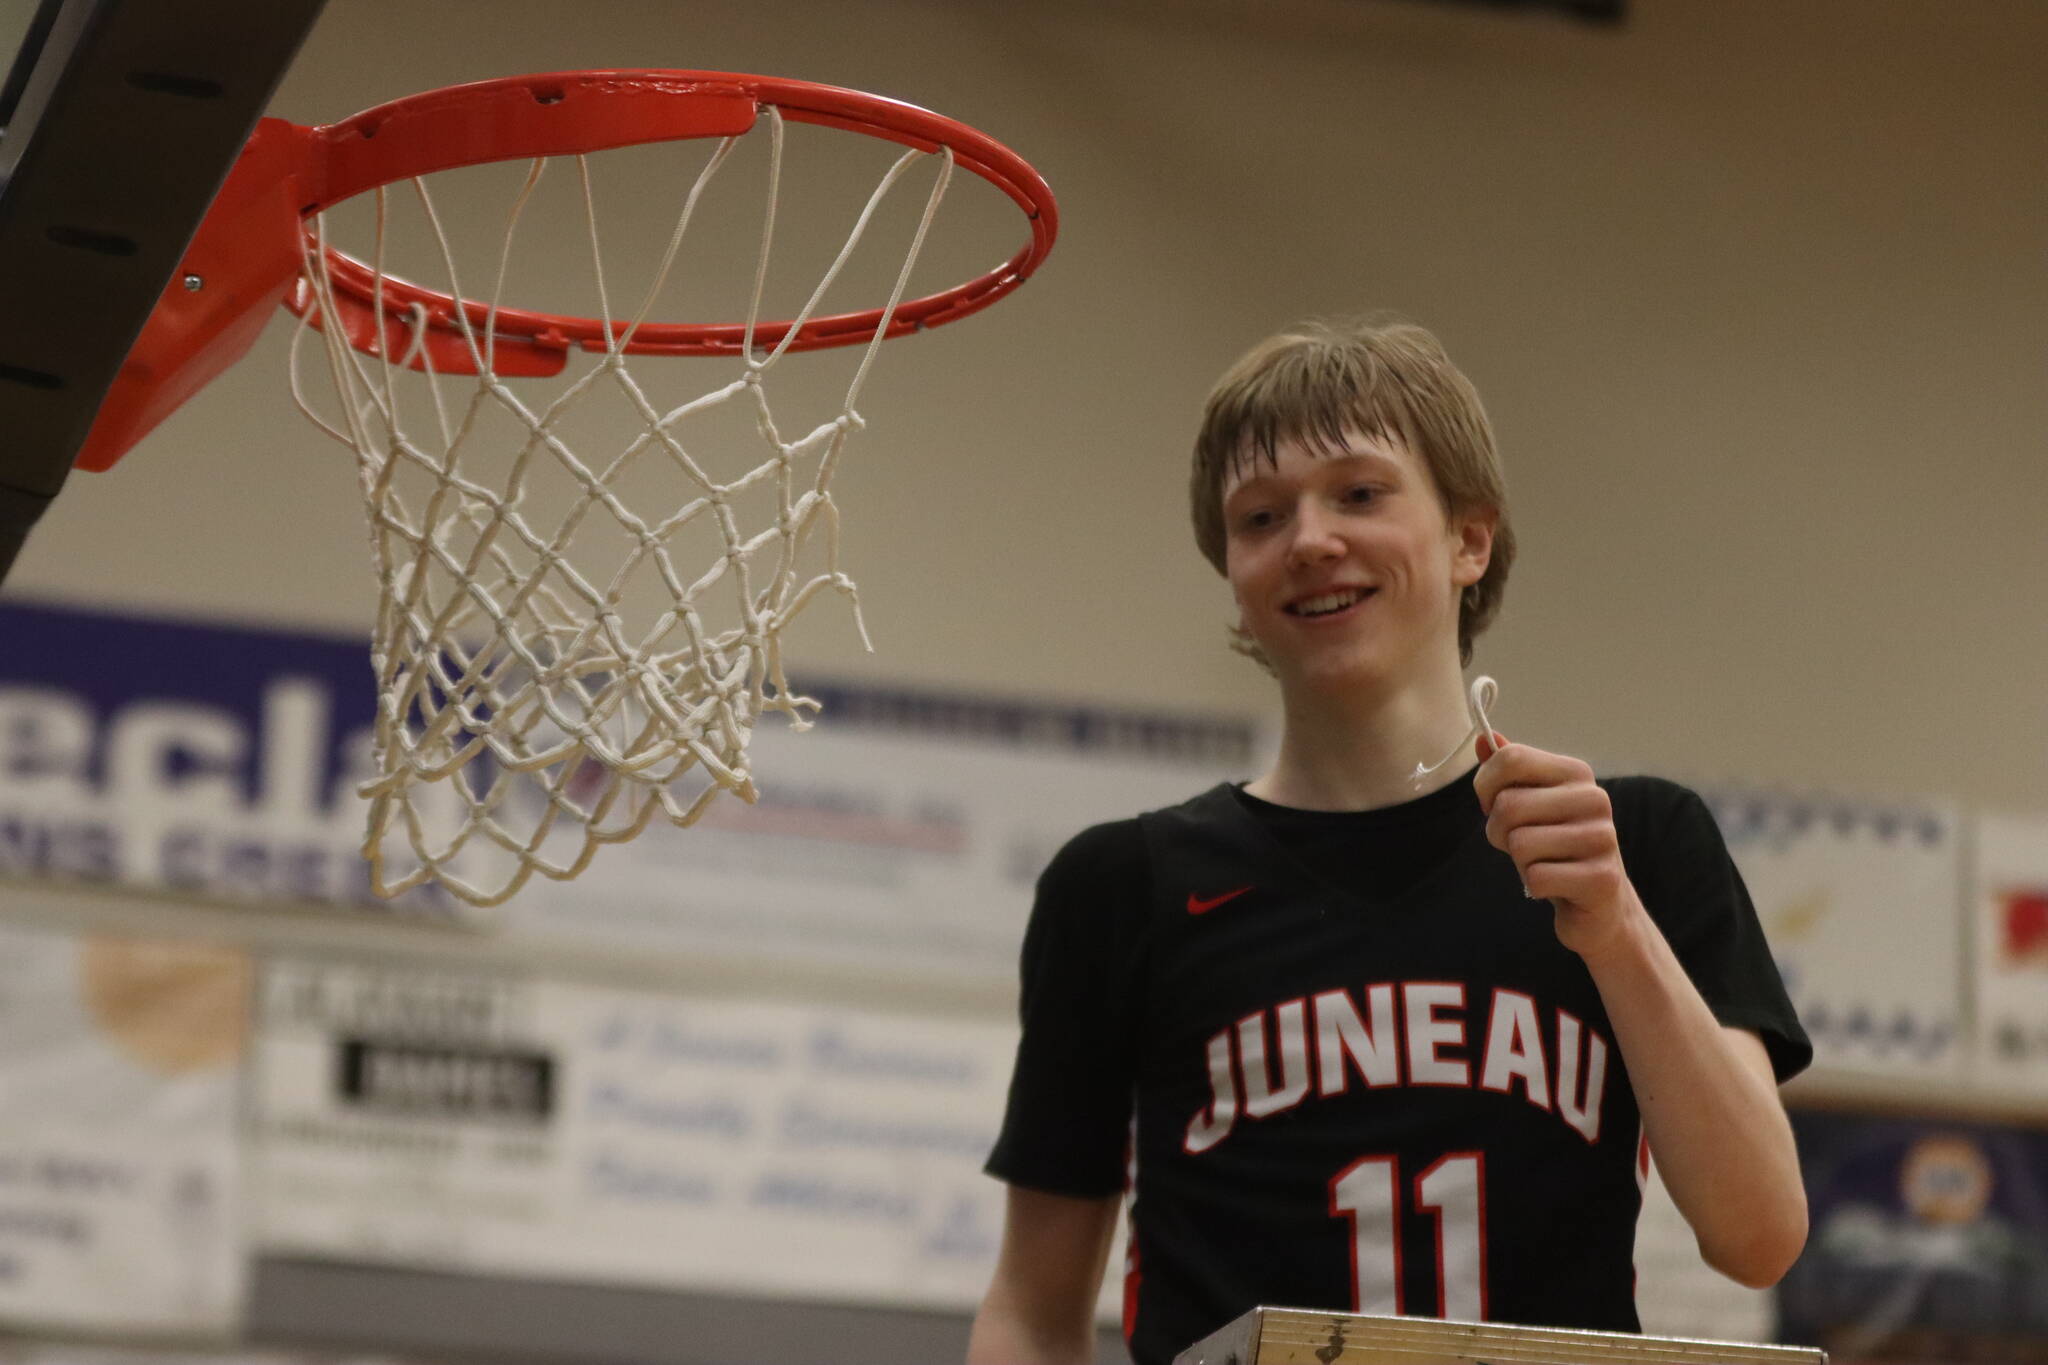 JDHS junior Sean Oliver (11) holds string from the championship net after a win against Ketchikan High School, making the Crimson Bears this year’s Region V 4A Tournament champs. Oliver finished the game with 30 points, six 3-pointers and a fourth-quarter slam dunk. (Jonson Kuhn / Juneau Empire)